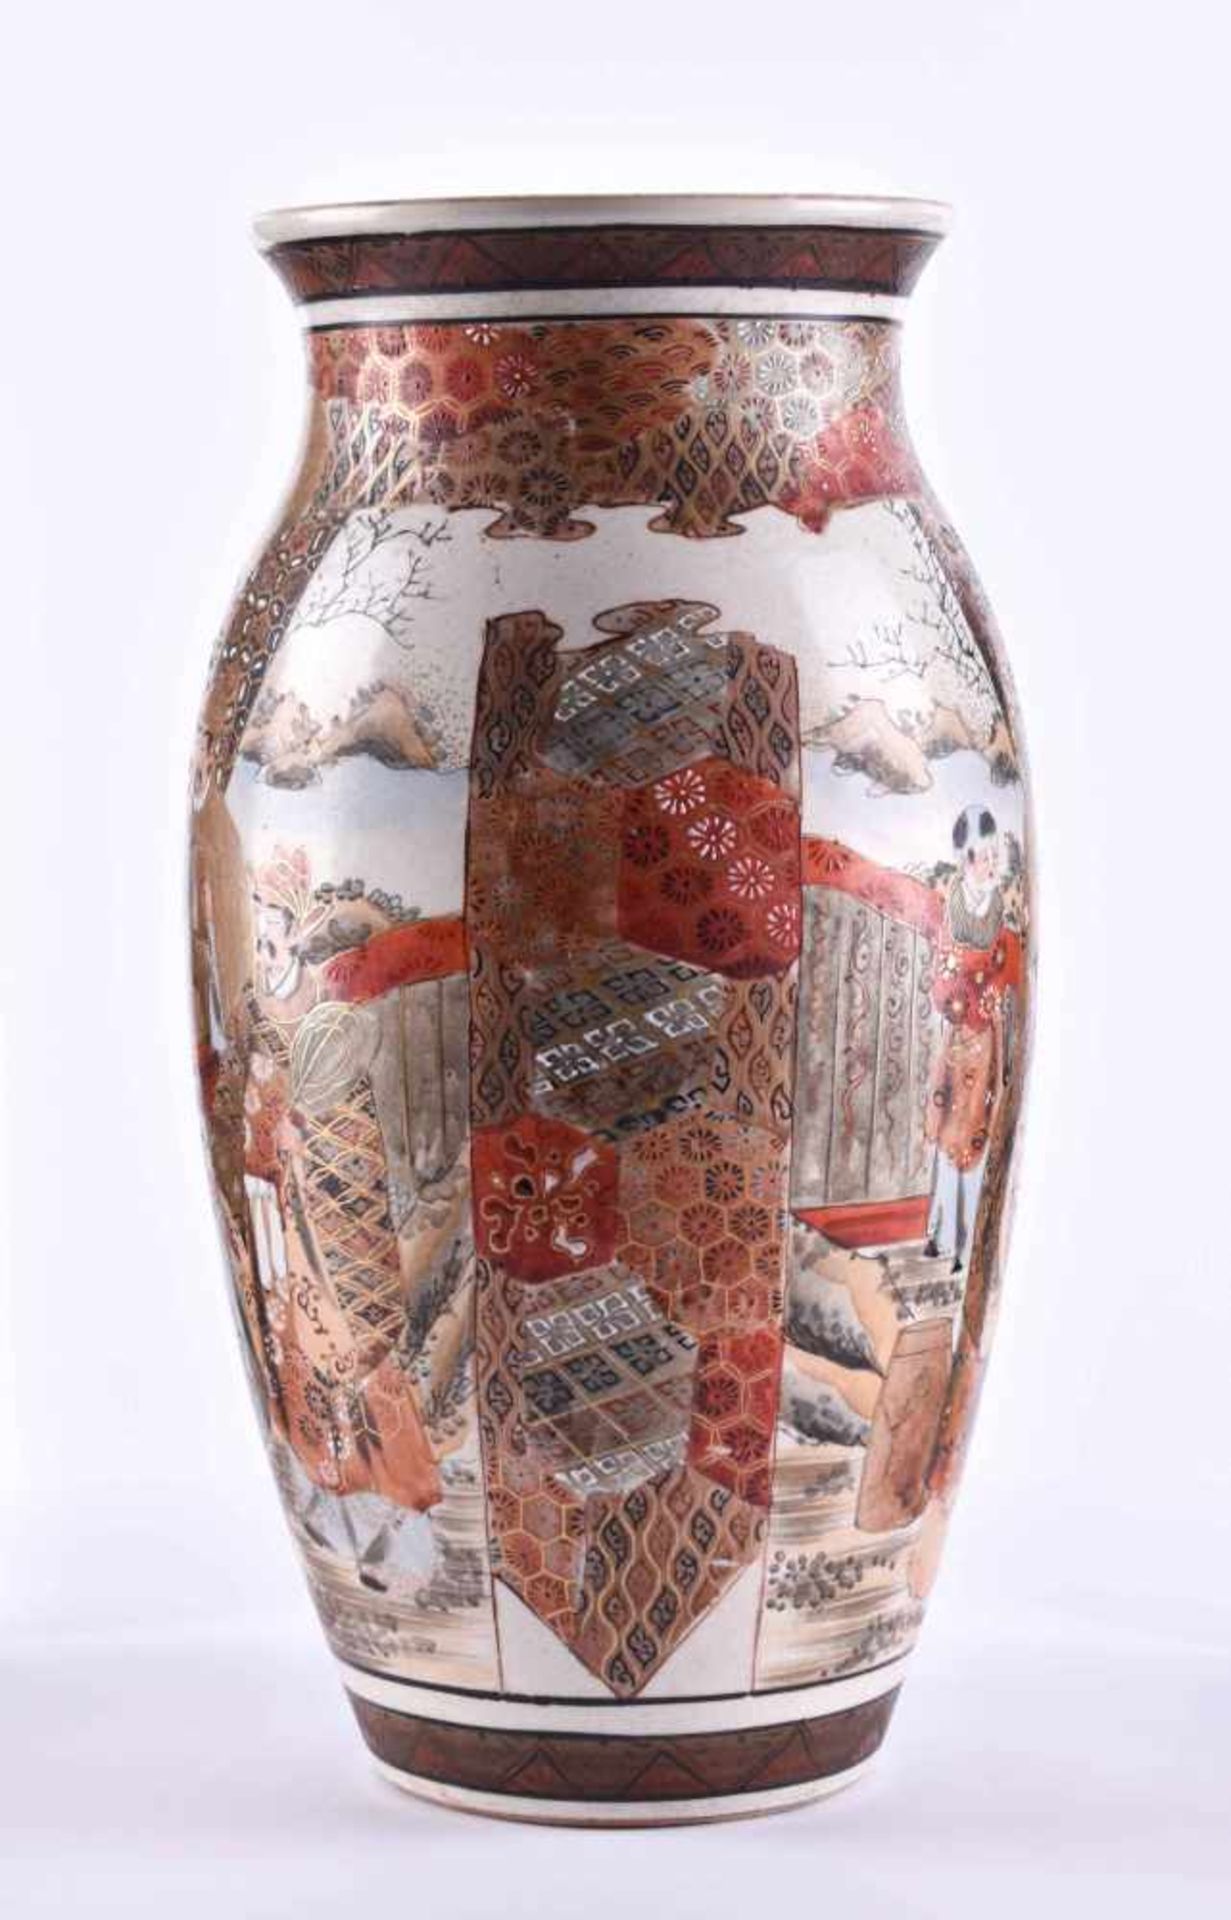 Satsuma vase Japan Meiji periodcolored and gold decorated, circumferentially painted with very - Image 2 of 6